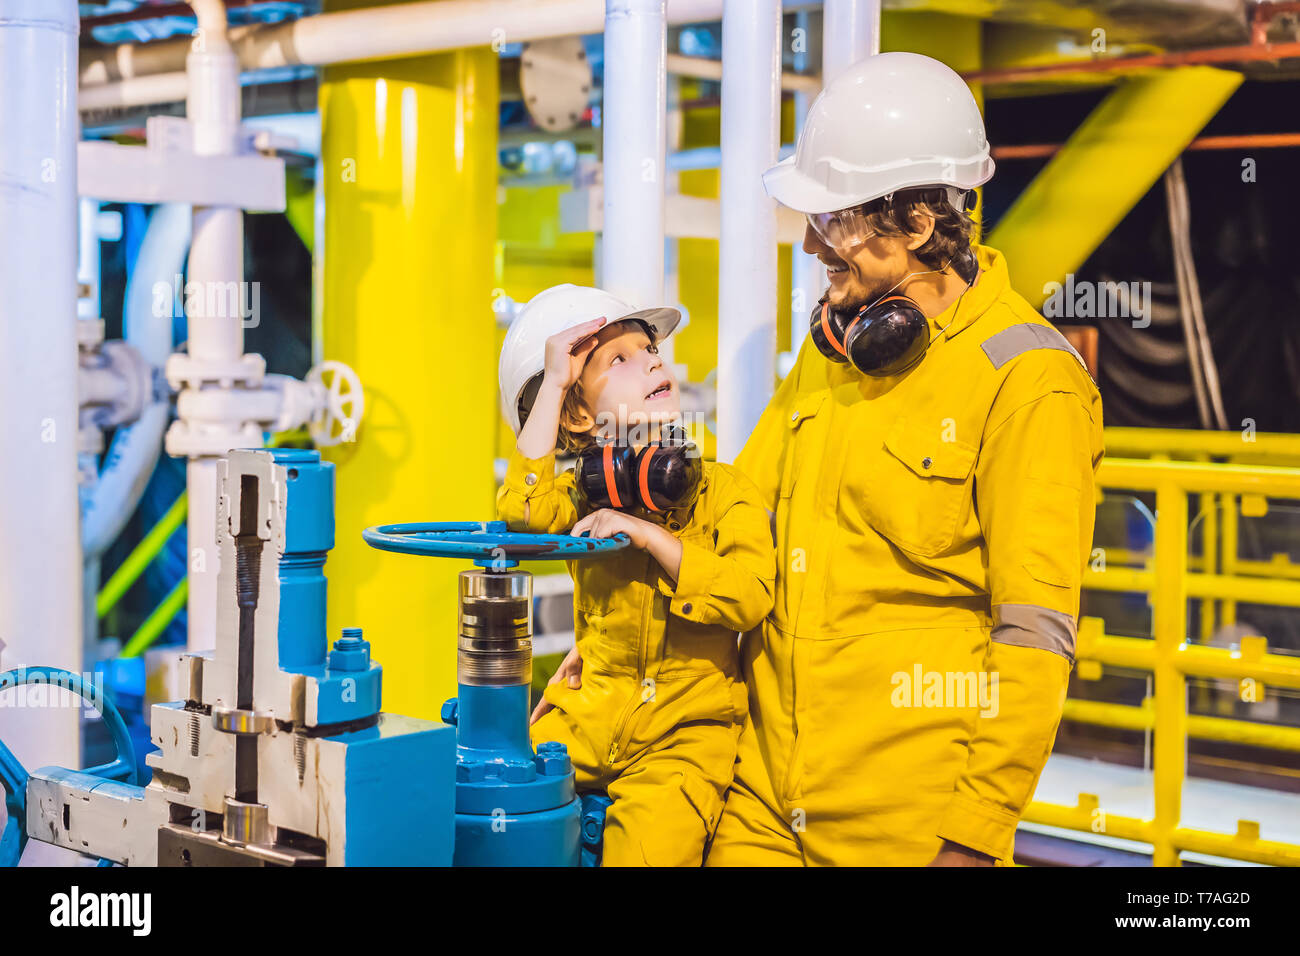 Young man and a little boy are both in a yellow work uniform, glasses, and helmet in an industrial environment, oil Platform or liquefied gas plant Stock Photo